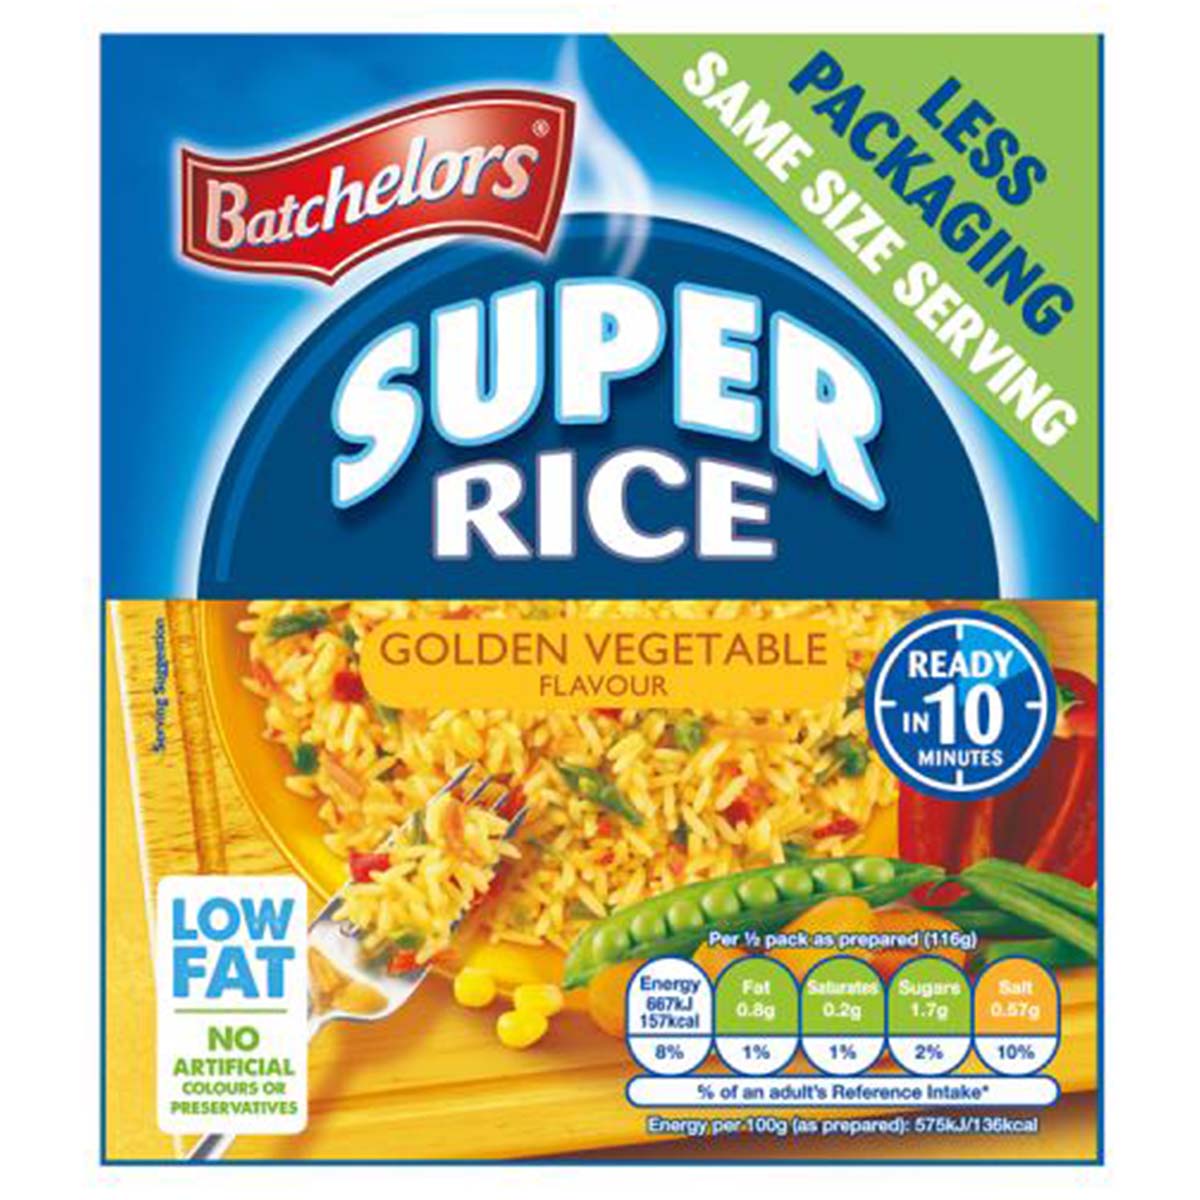 Batchelors - Super Rice Golden Vegetable Flavour Packet Rice - 90g - Continental Food Store